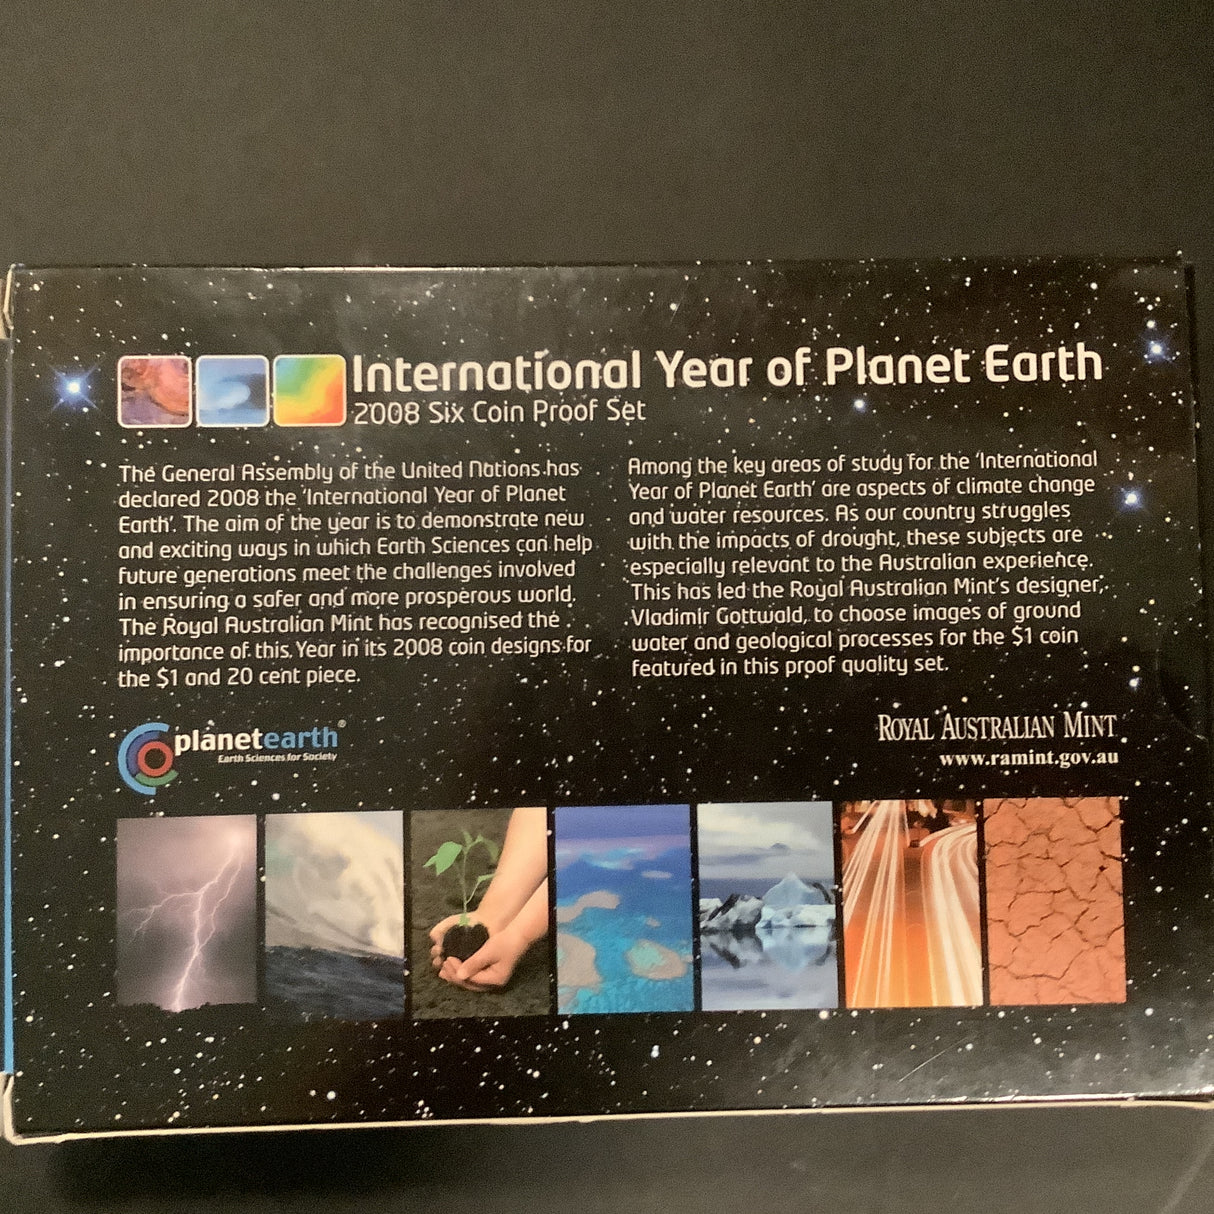 2008 6 Coin Proof Set. International Year of Planet Earth.